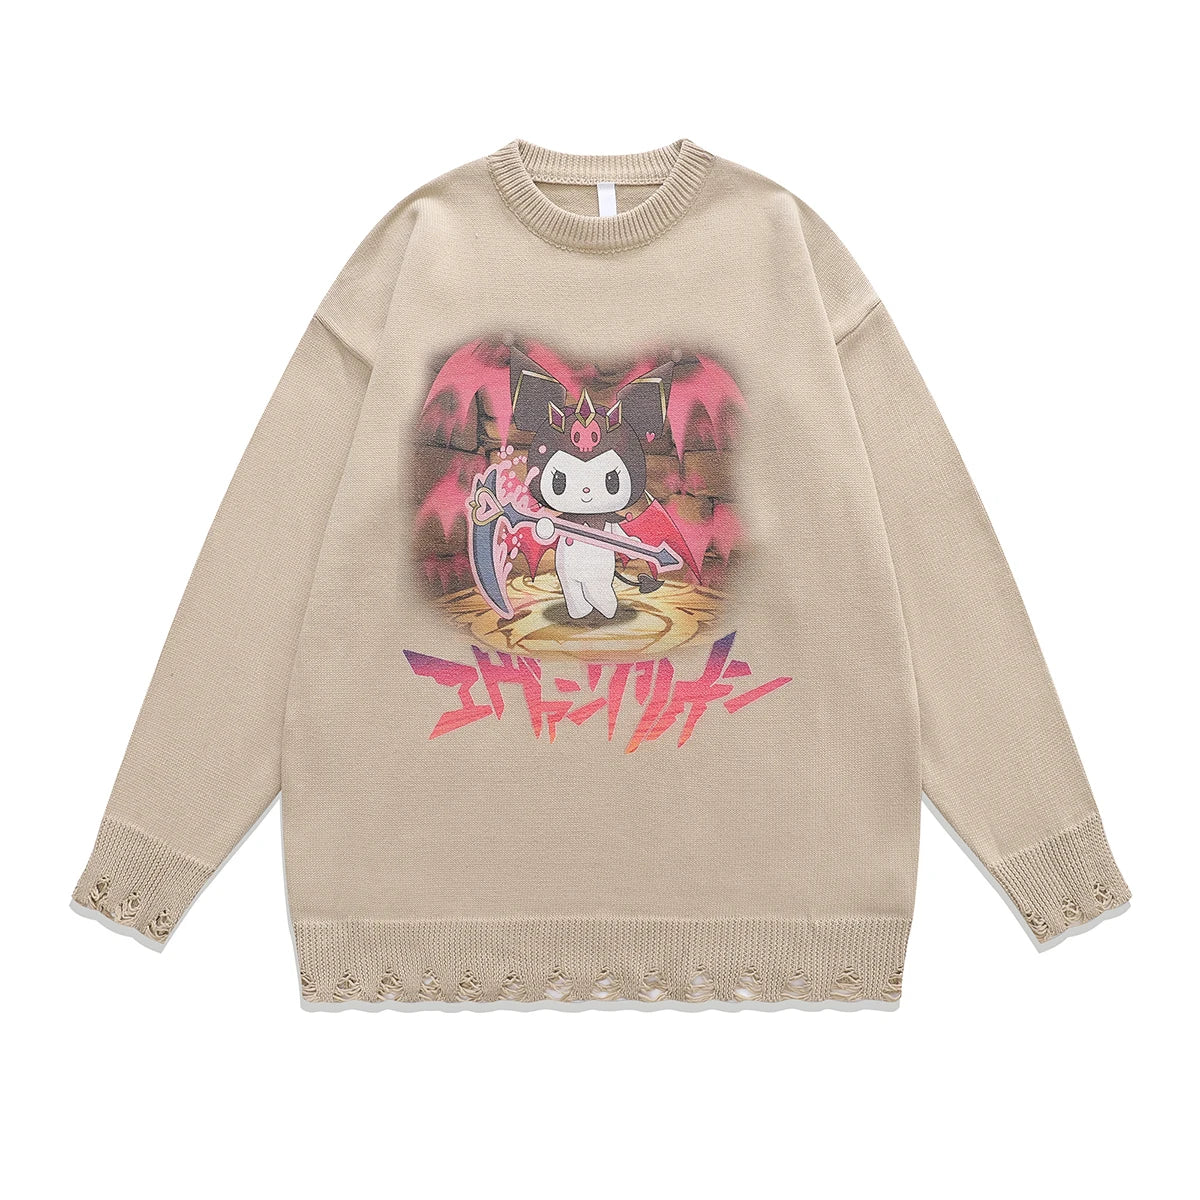 Anime New Jeans Sweater Apricot 4